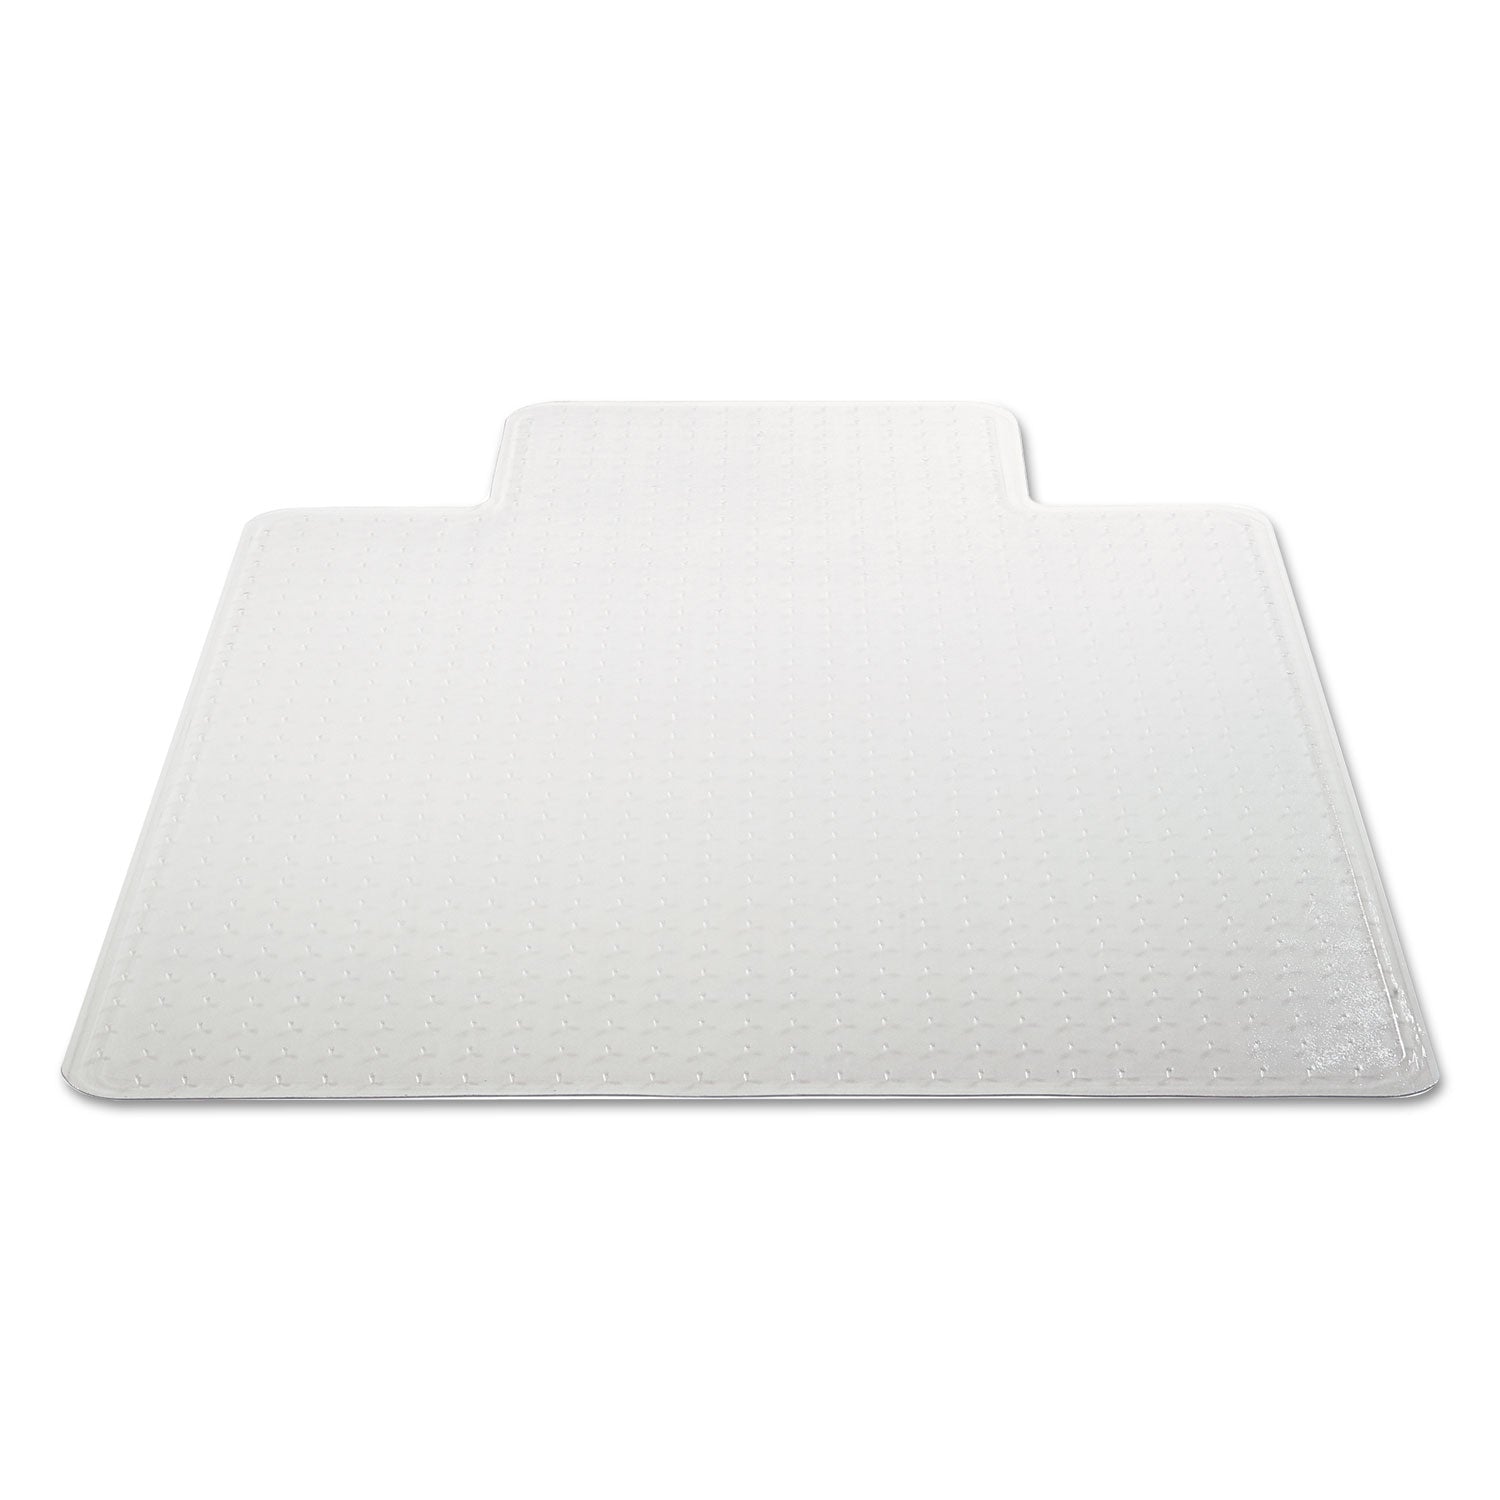 occasional-use-studded-chair-mat-for-flat-pile-carpet-36-x-48-lipped-clear_alemat3648cfpl - 8